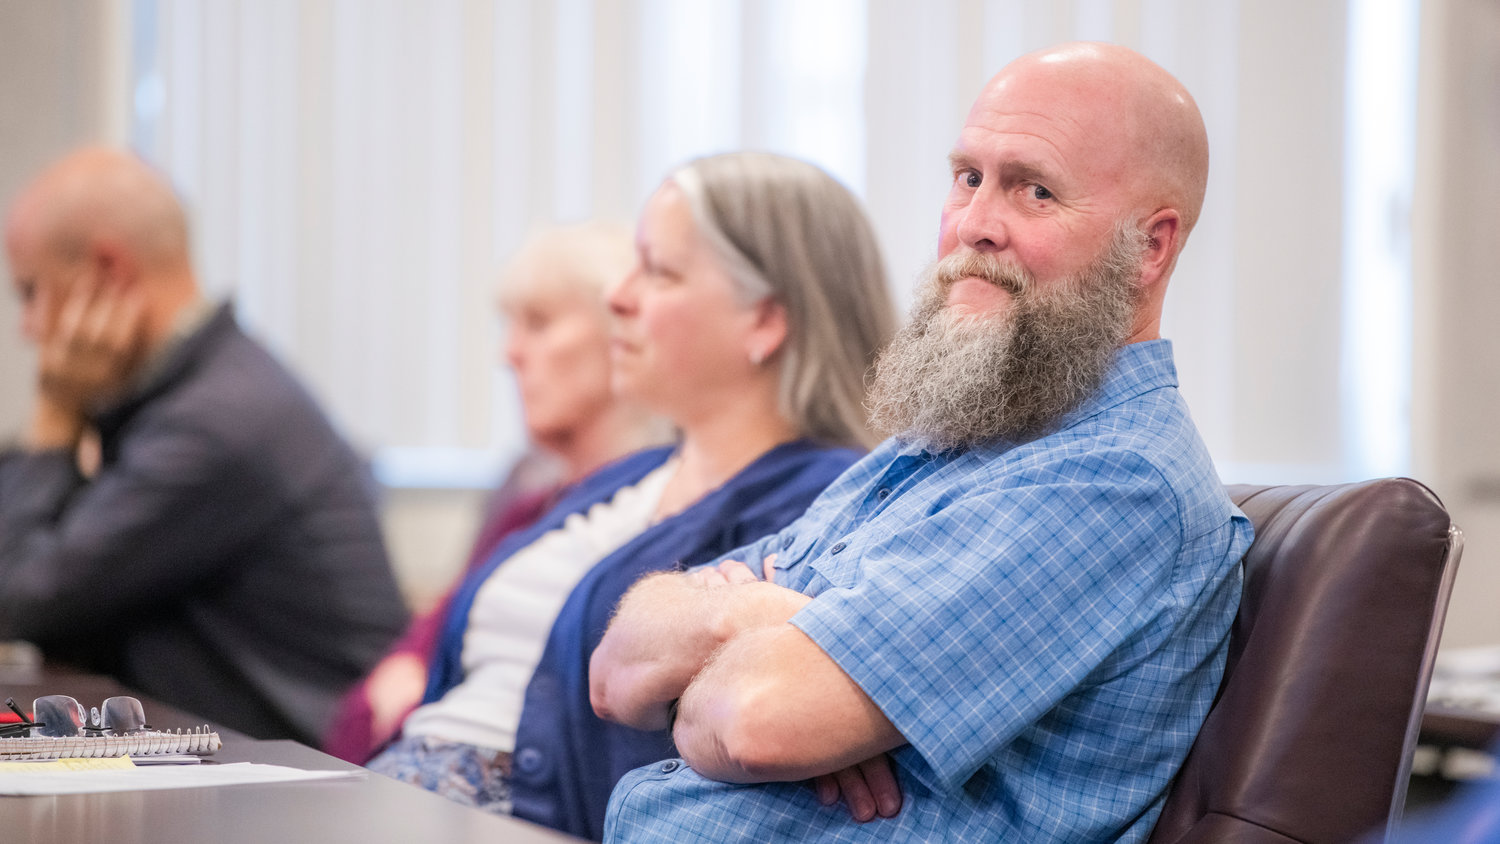 Shawn Seeger, a Mineral resident, attends a Lewis County Planning Commission meeting at the courthouse Tuesday evening during a workshop on a rezone proposal north of Mineral Lake.